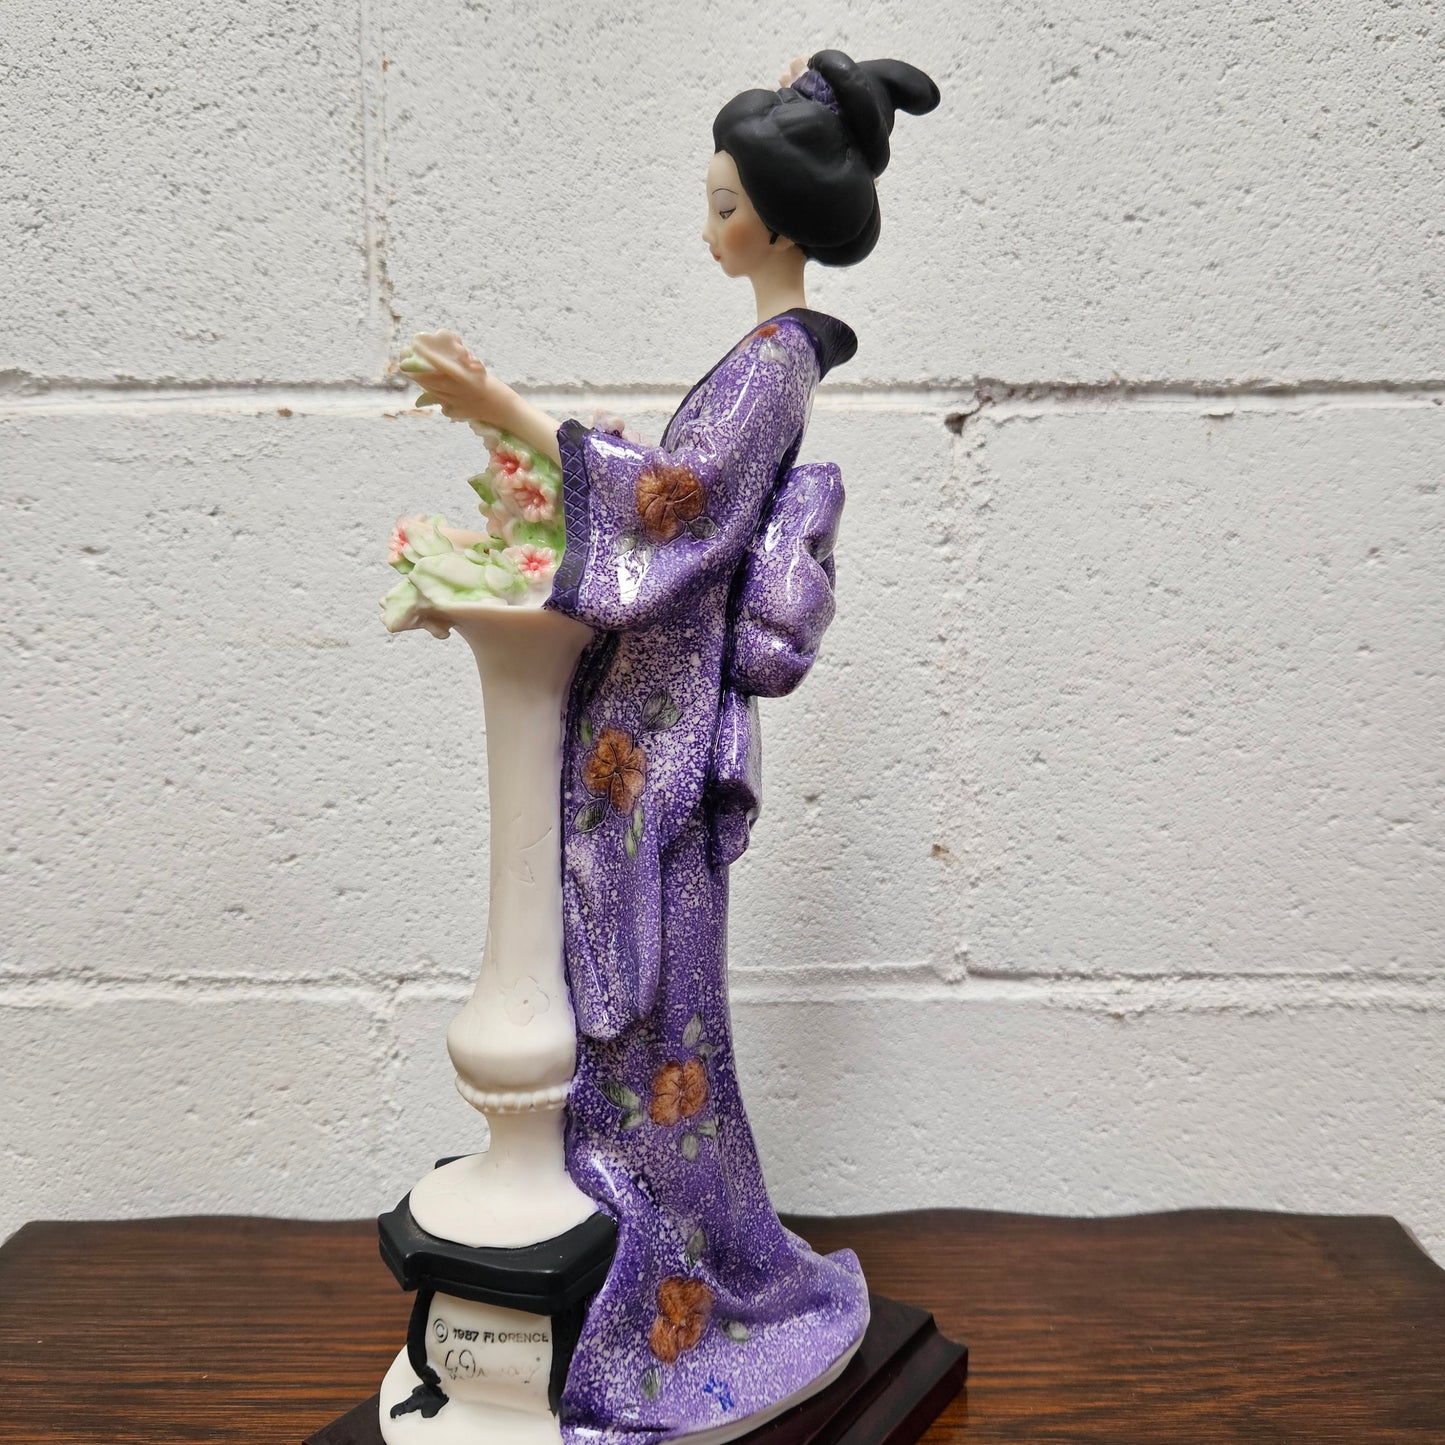 Madame Butterfly G. Armani Figure